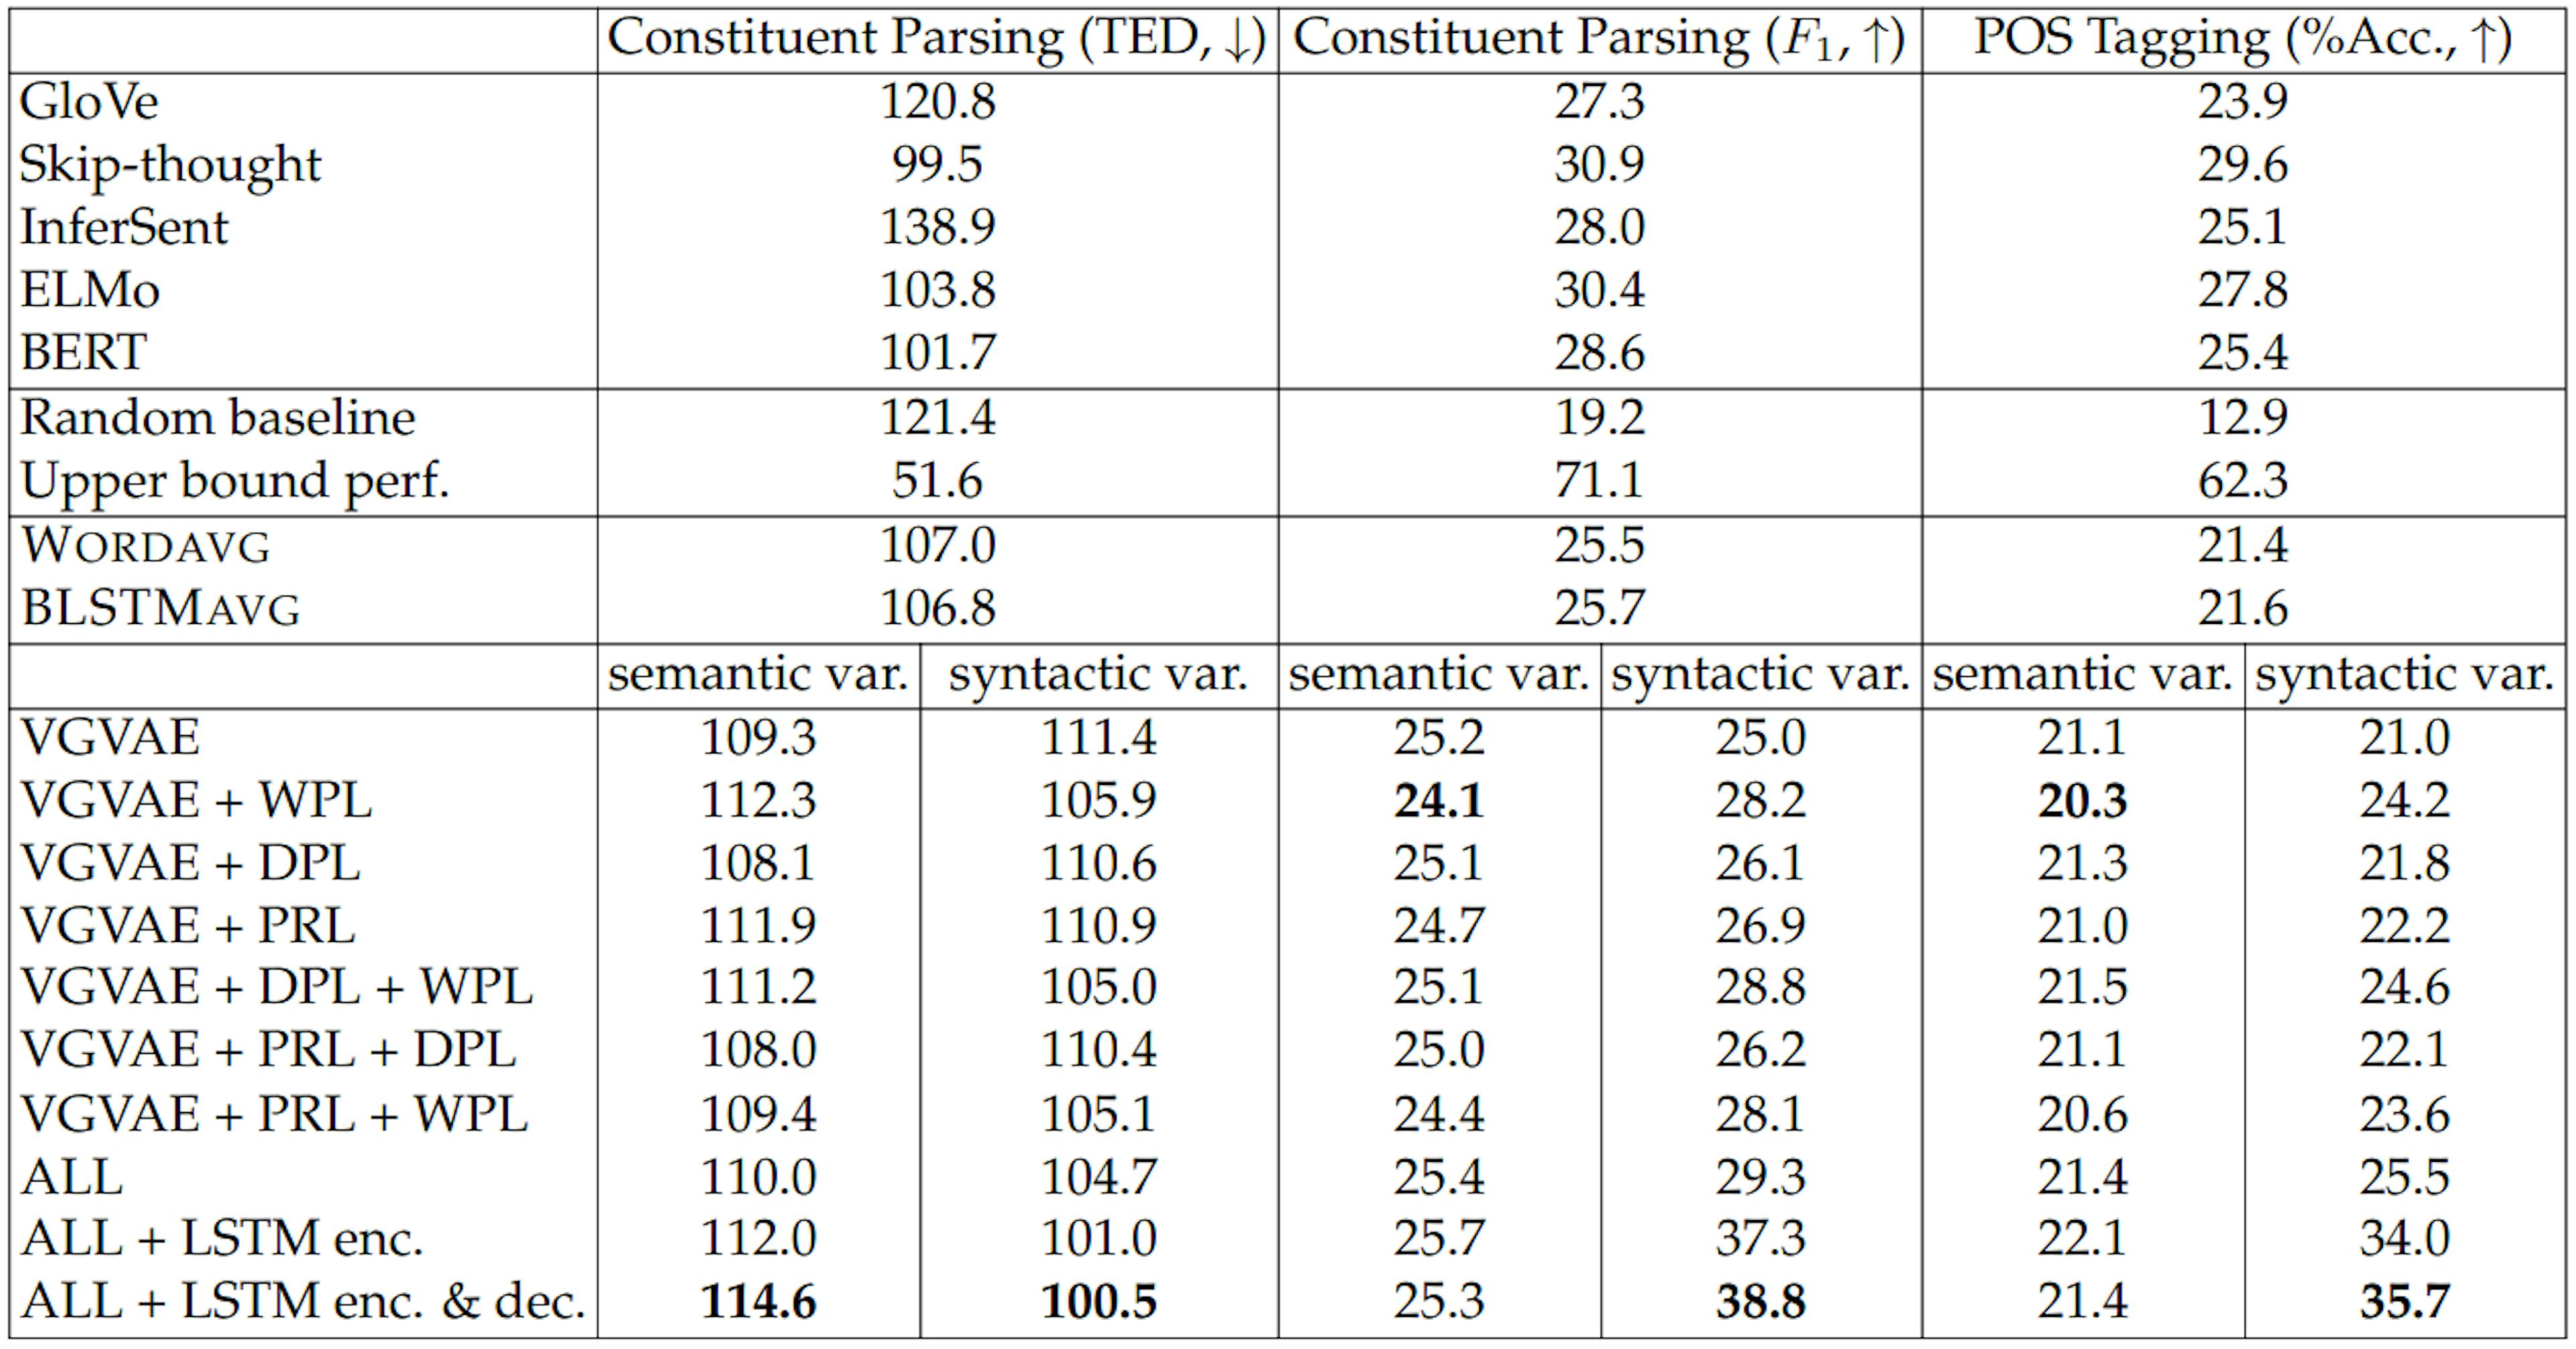 Table 5.2: Syntactic similarity evaluations, showing tree edit distance (TED) and labeled F1 score for constituent parsing, and accuracy (%) for part-of-speech tagging. Numbers are boldfaced if they are worst in the “semantic variable” column or best in the “syntactic variable” column. “ALL” indicates all the multi-task losses are used.